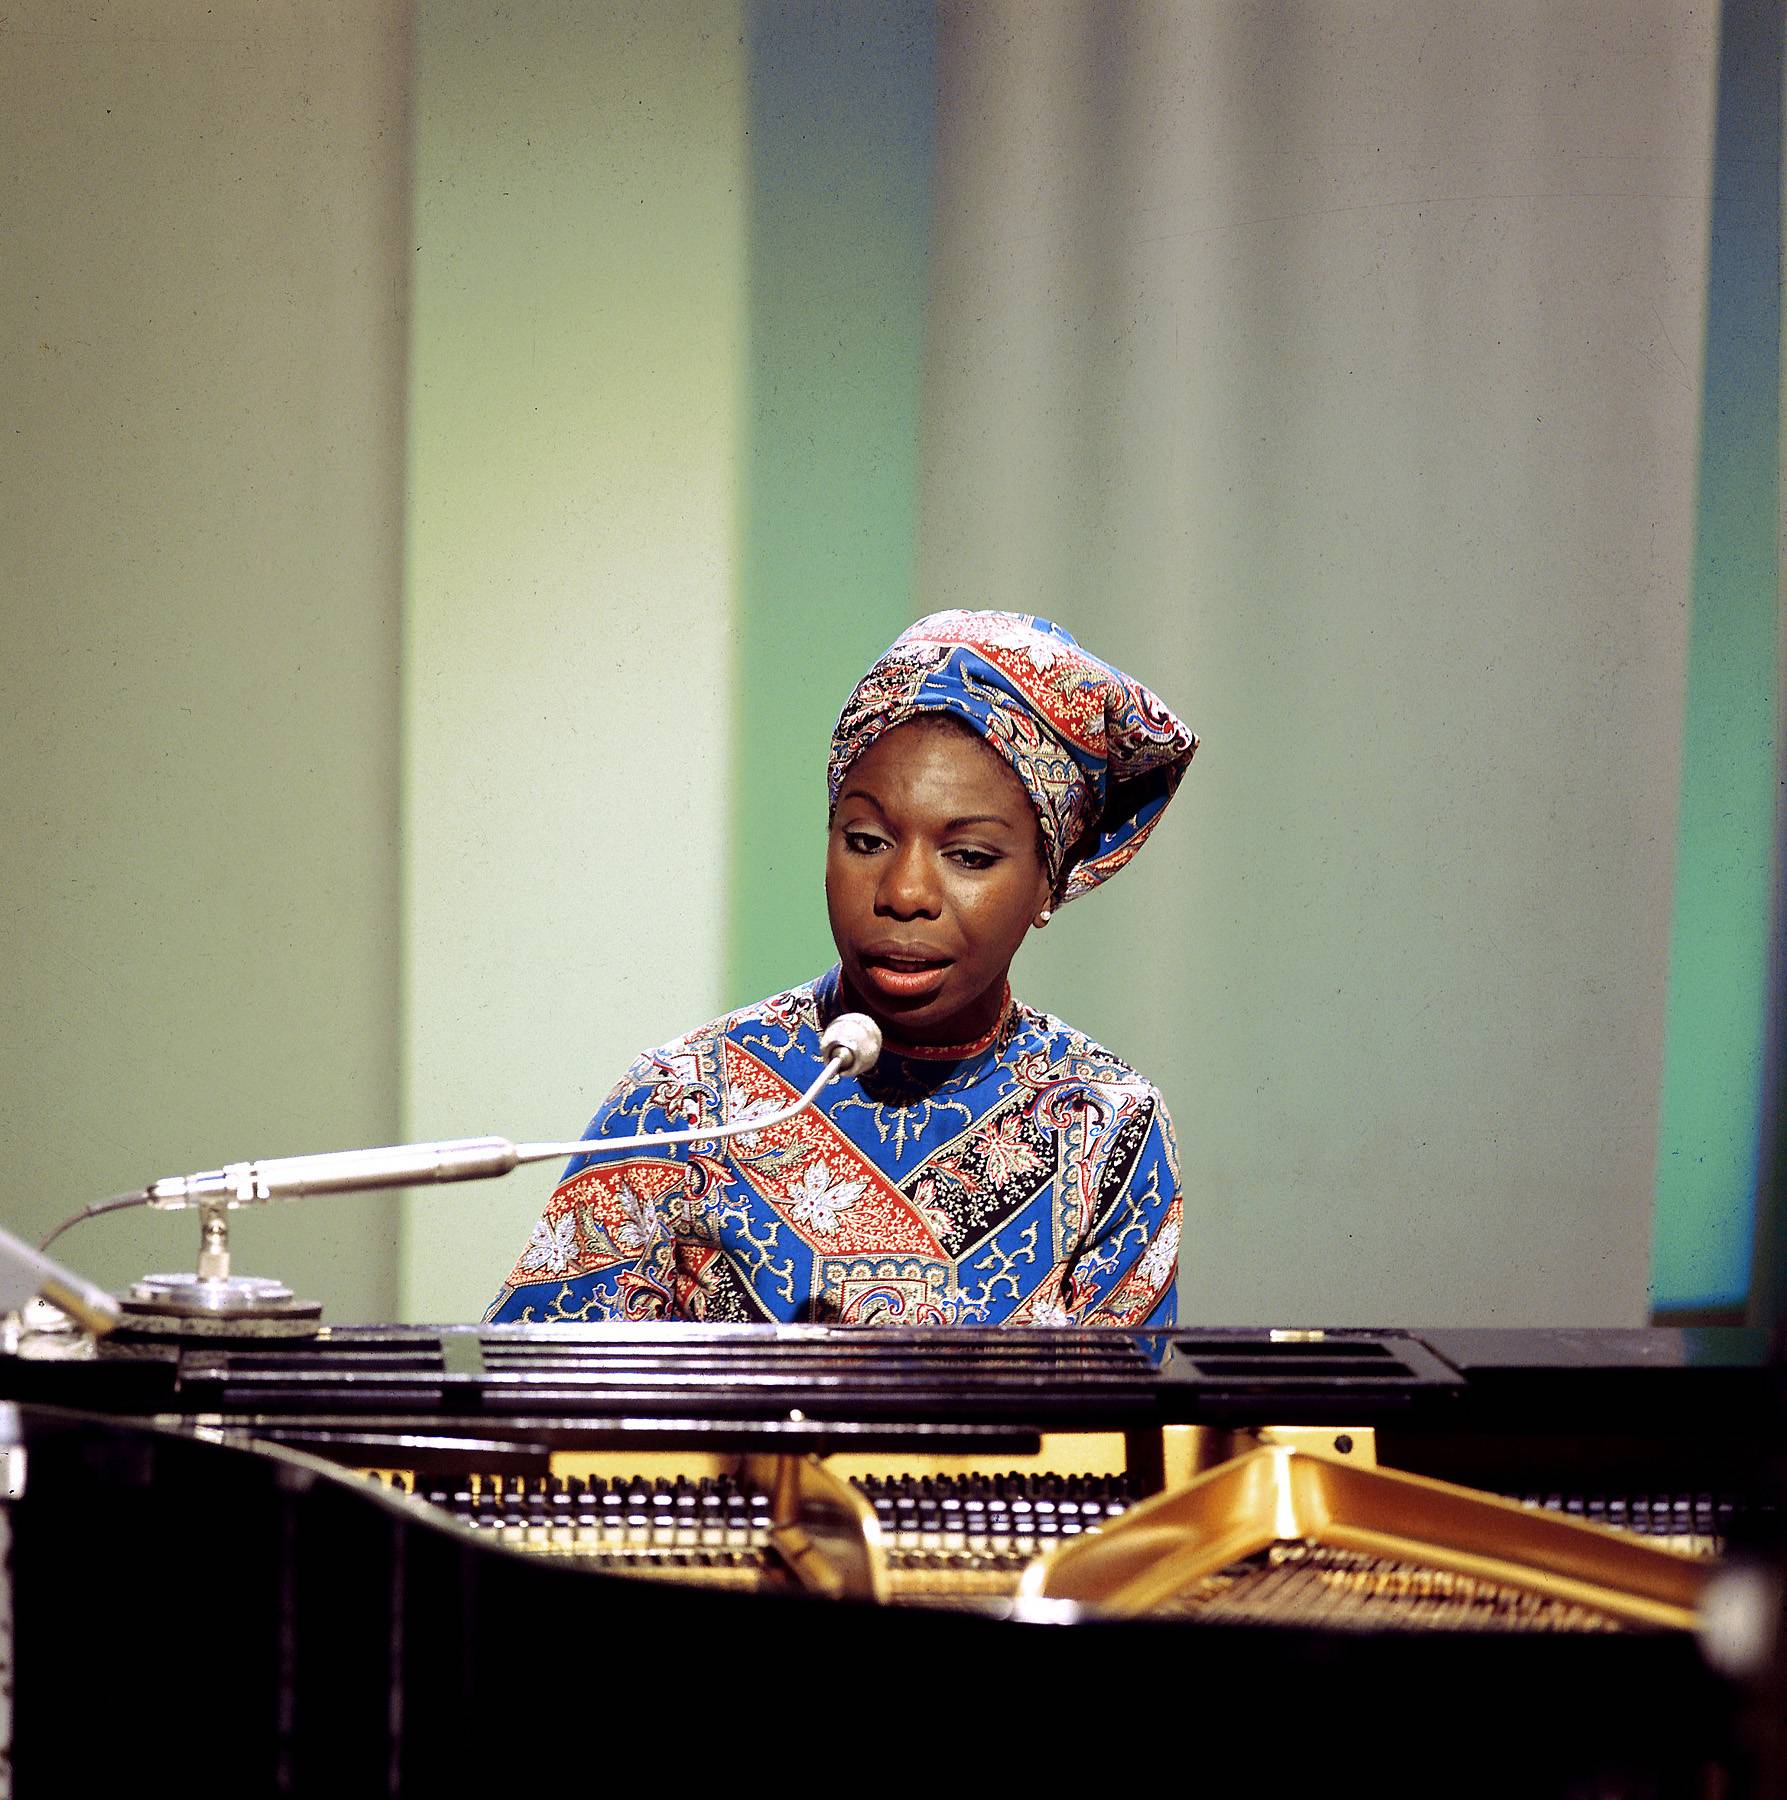 Being Mary Jane: Episode 5 Soundtrack - It looks like Being Mary Jane can't get enough of Nina Simone and this week we feature her song &quot;I Want a Little Sugar in My Bowl&quot; to start the episode strong and set the tone of episode 5.(Photo: David Redfern/Redferns/Getty Images)